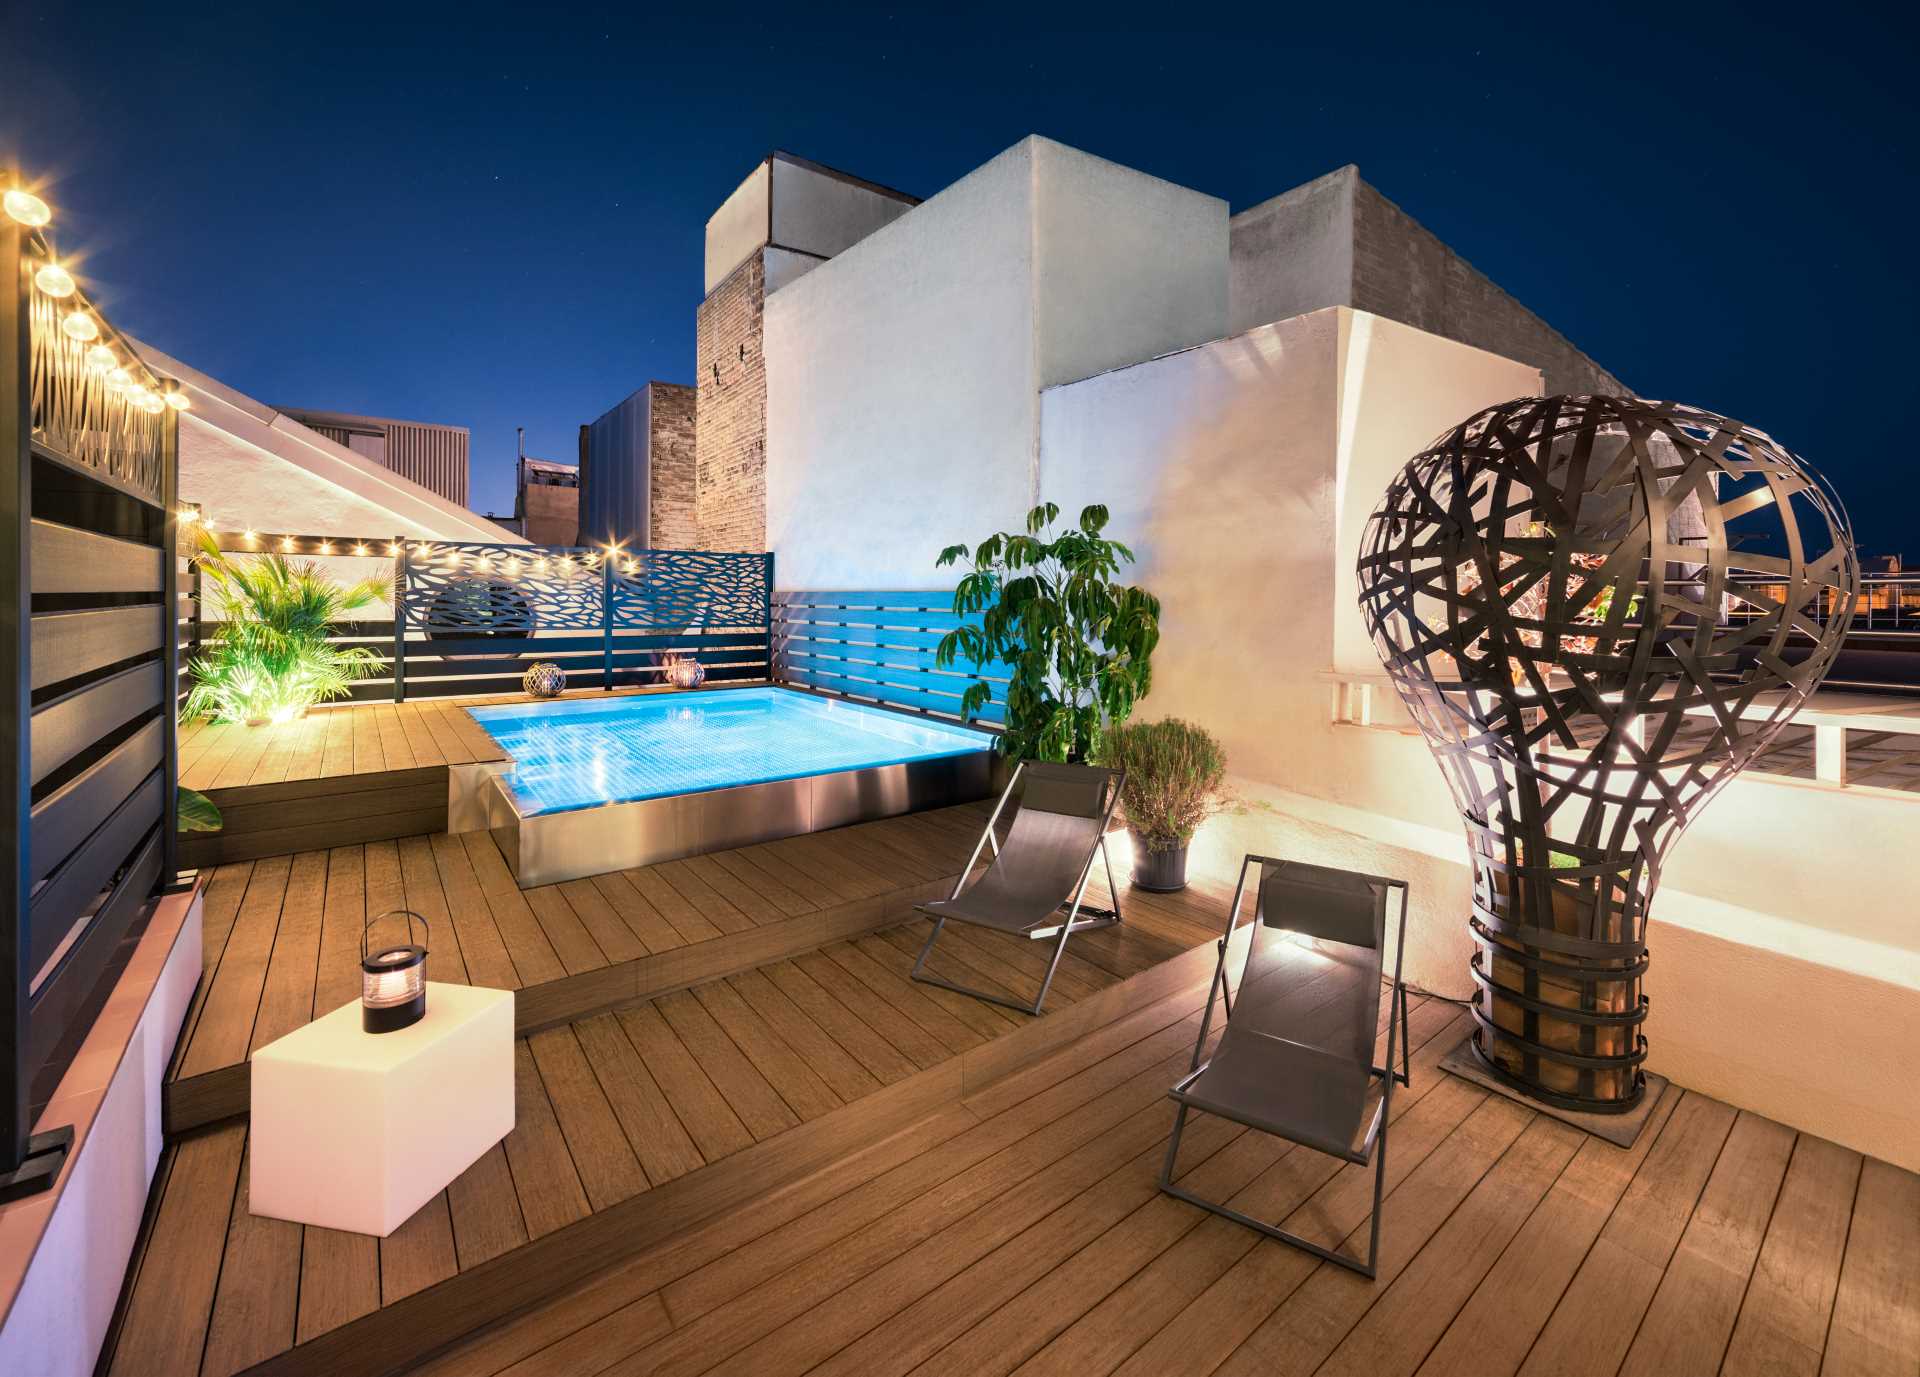 This rooftop includes a deck with an overflowing stainless steel pool and seating areas.